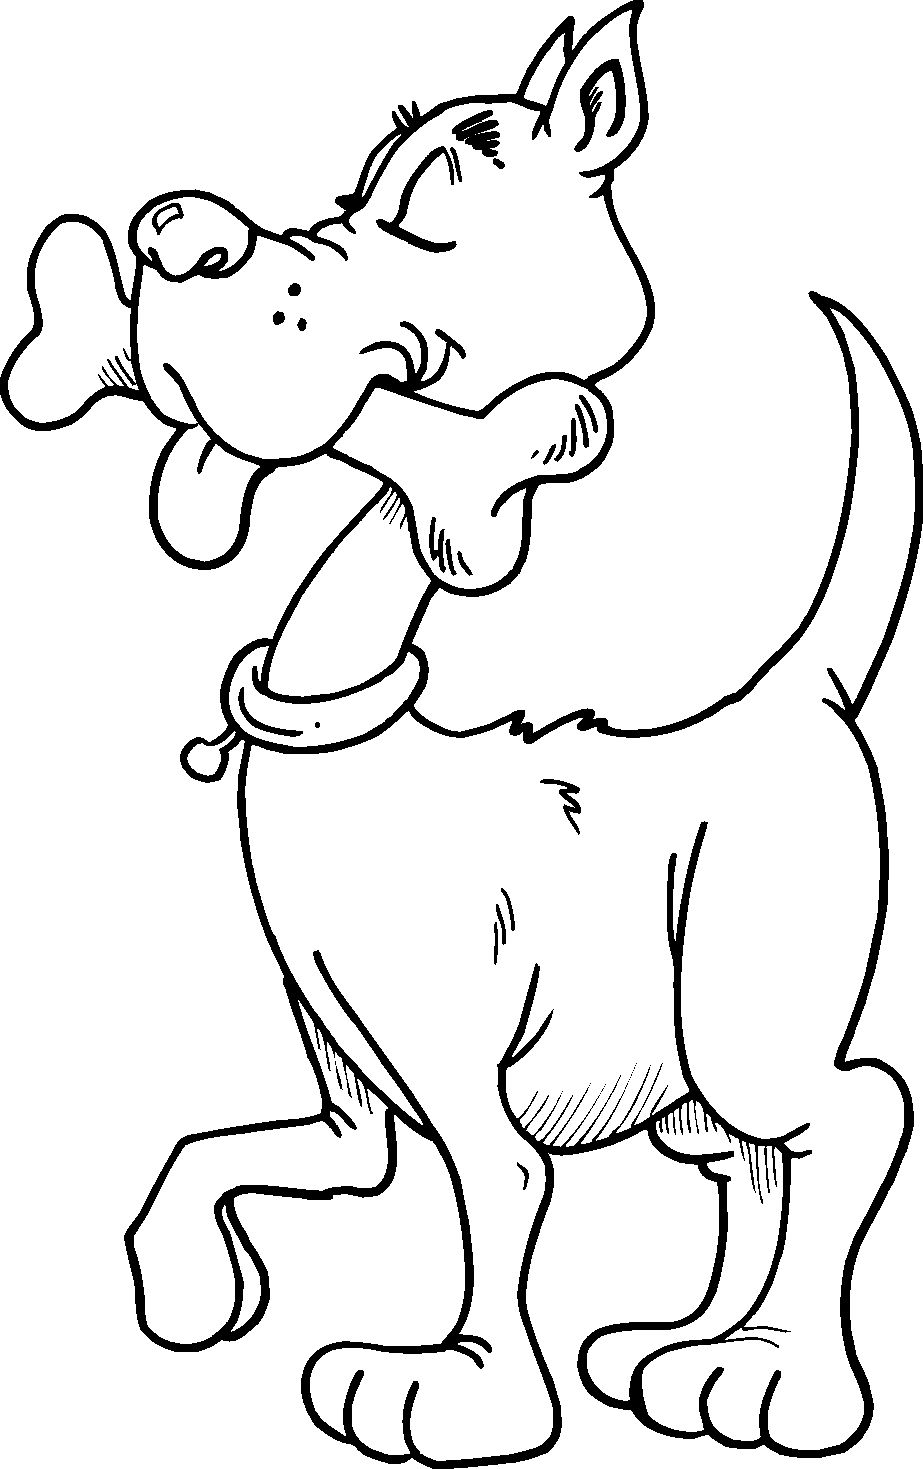 Cartoon Coloring Pages Free Printable Pictures Coloring Coloring Wallpapers Download Free Images Wallpaper [coloring654.blogspot.com]